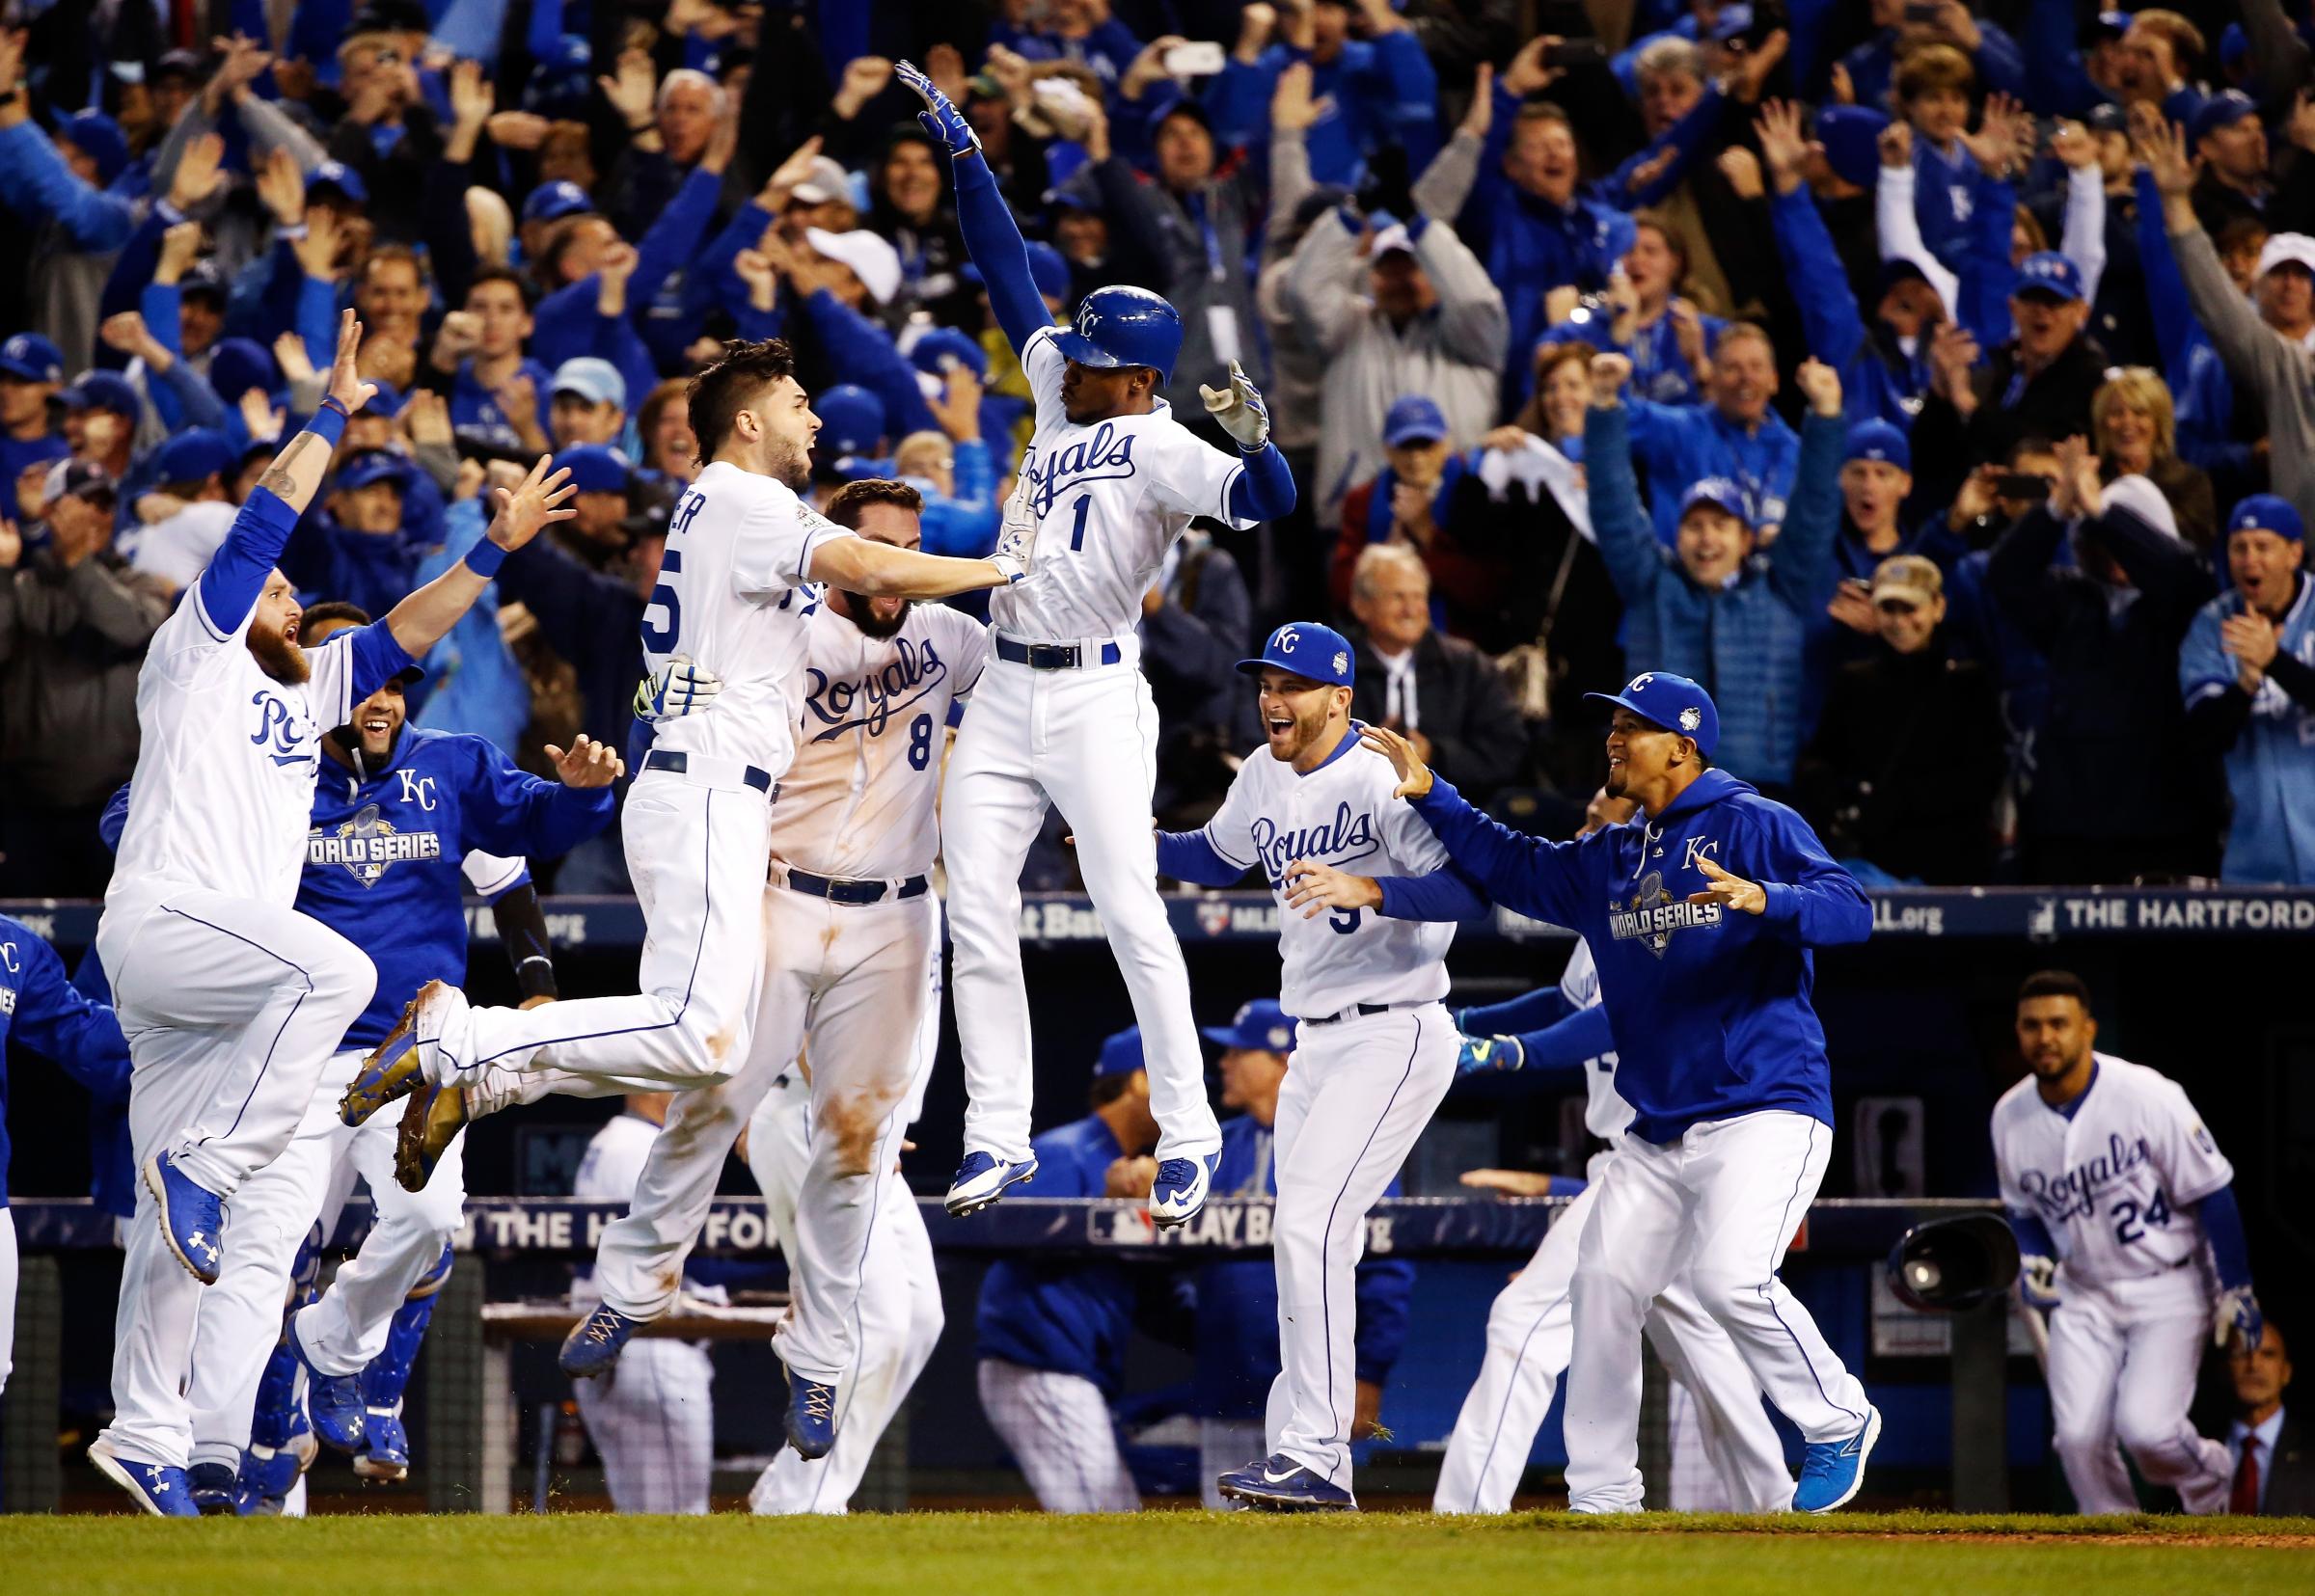 Kansas City Royals players Eric Hosmer (35), Mike Moustakas (8) and Jarrod Dyson (1) celebrate defeating the New York Mets in 14 innings during Game One of the World Series at Kauffman Stadium on Oct. 27, 2015 in Kansas City, Mo.